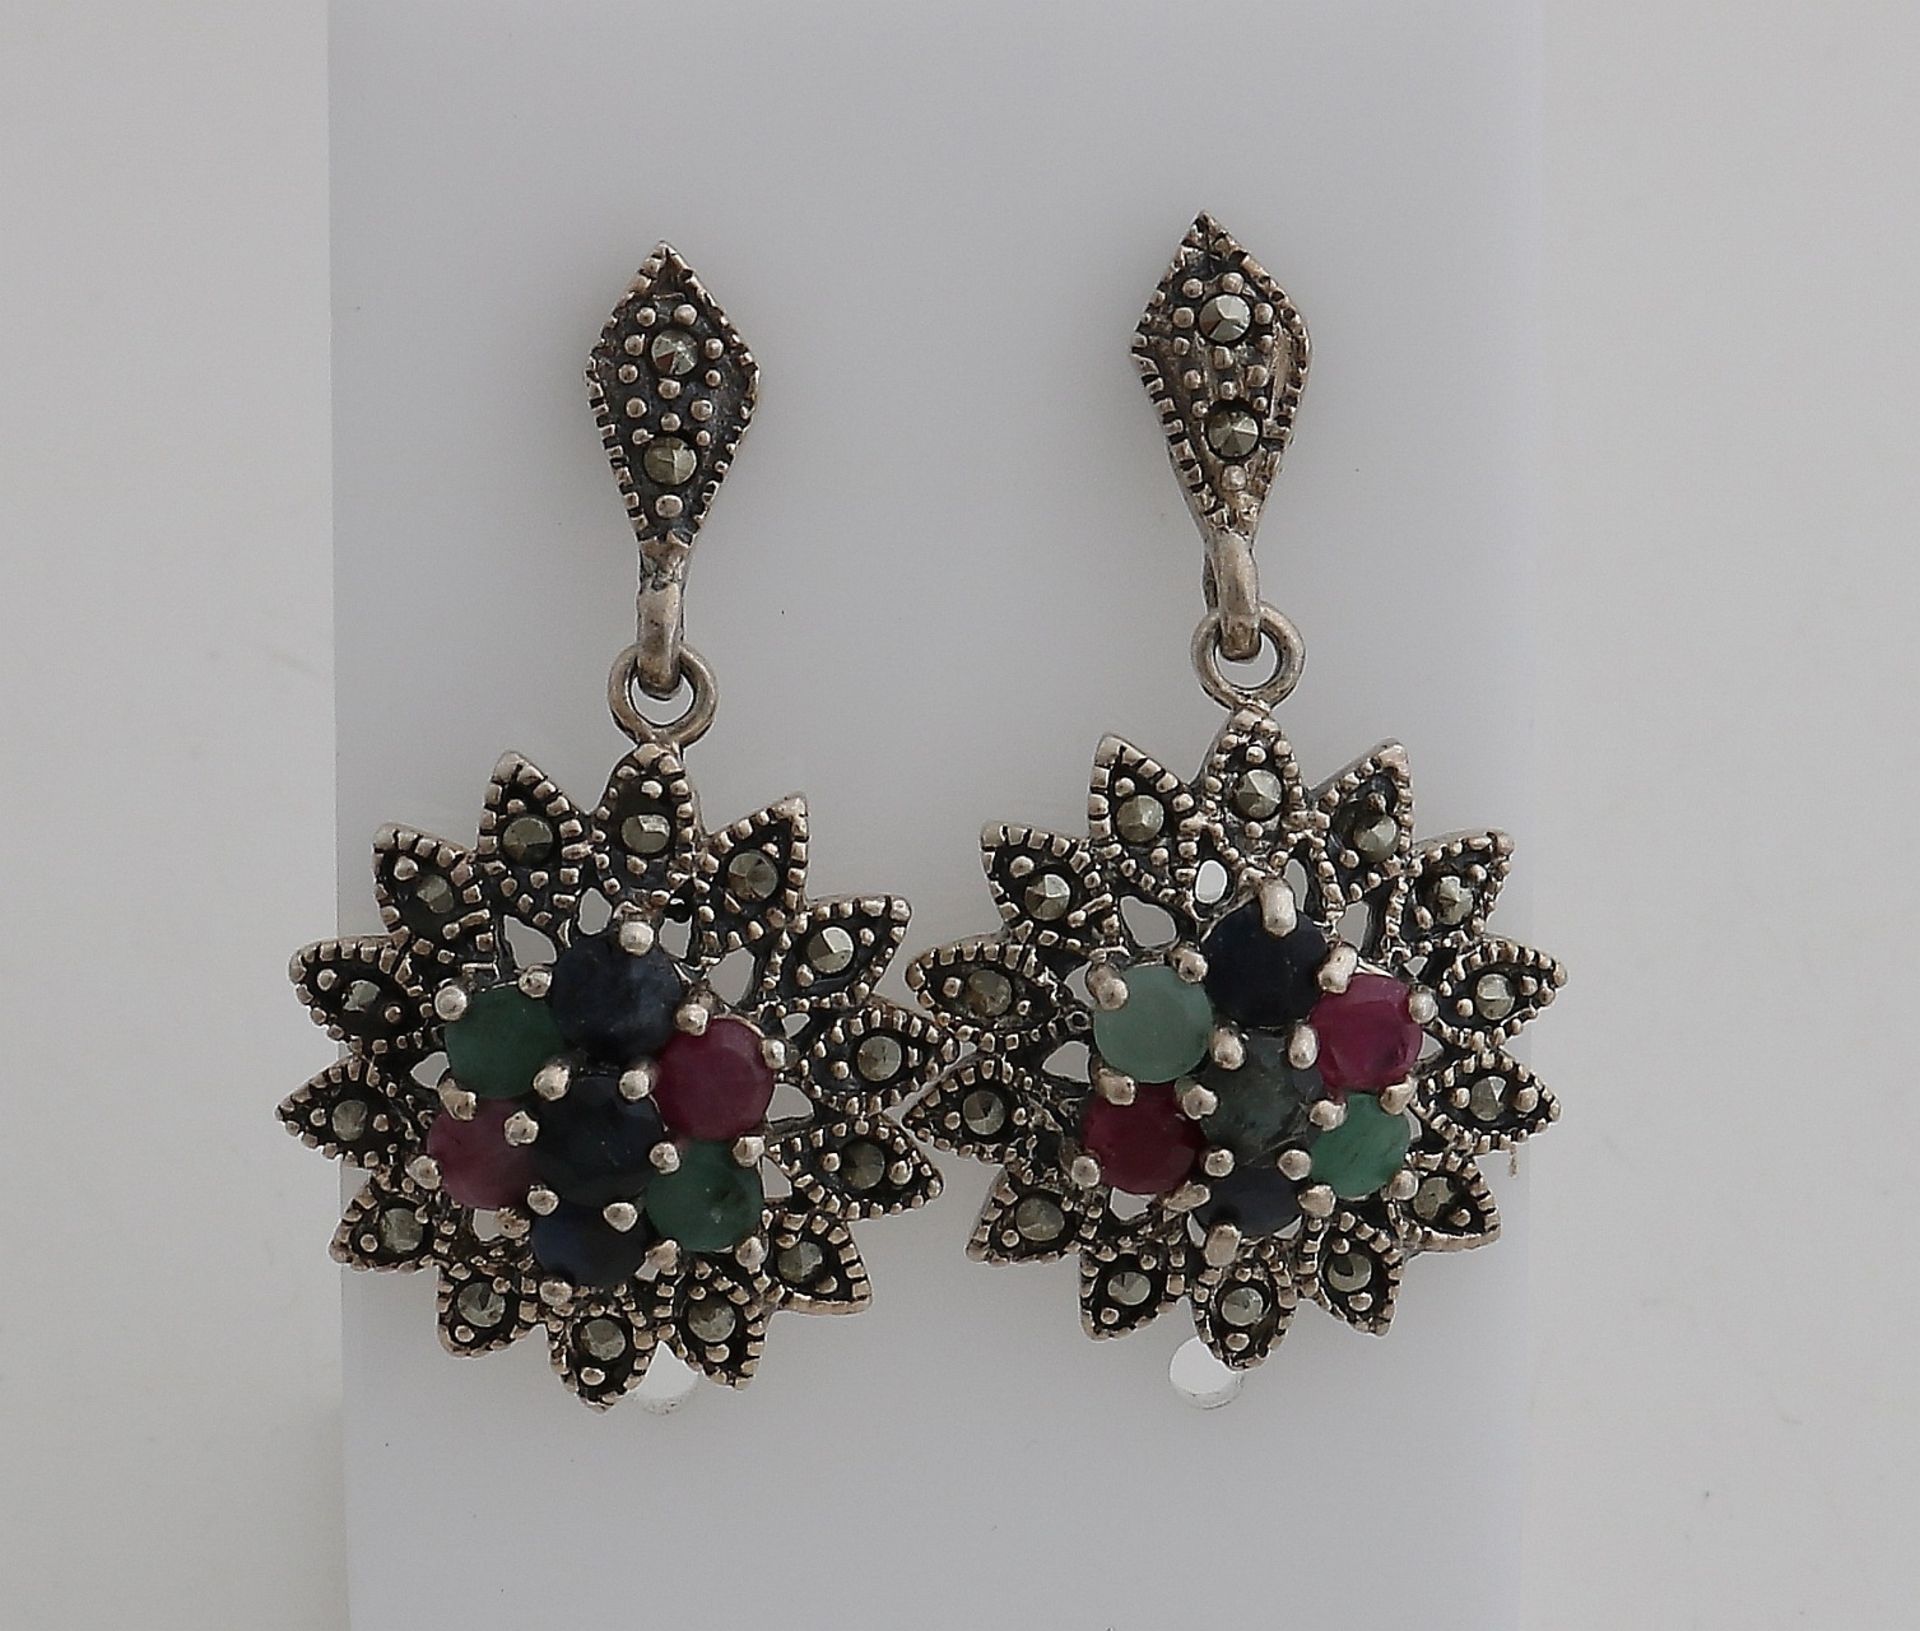 Silver earrings with colored stones - Image 2 of 2